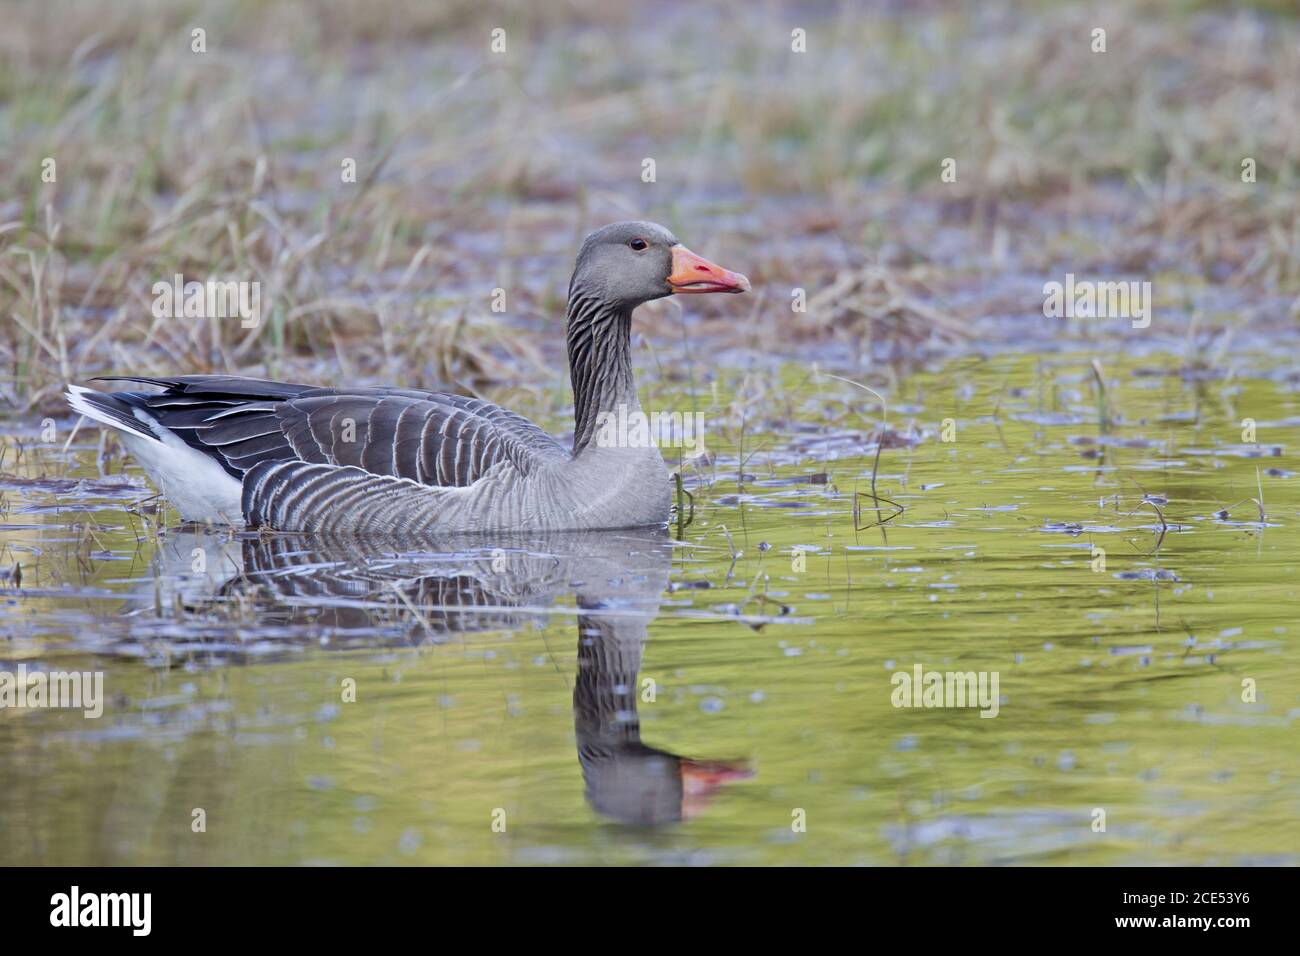 Greylag Goose on a forest pond Stock Photo